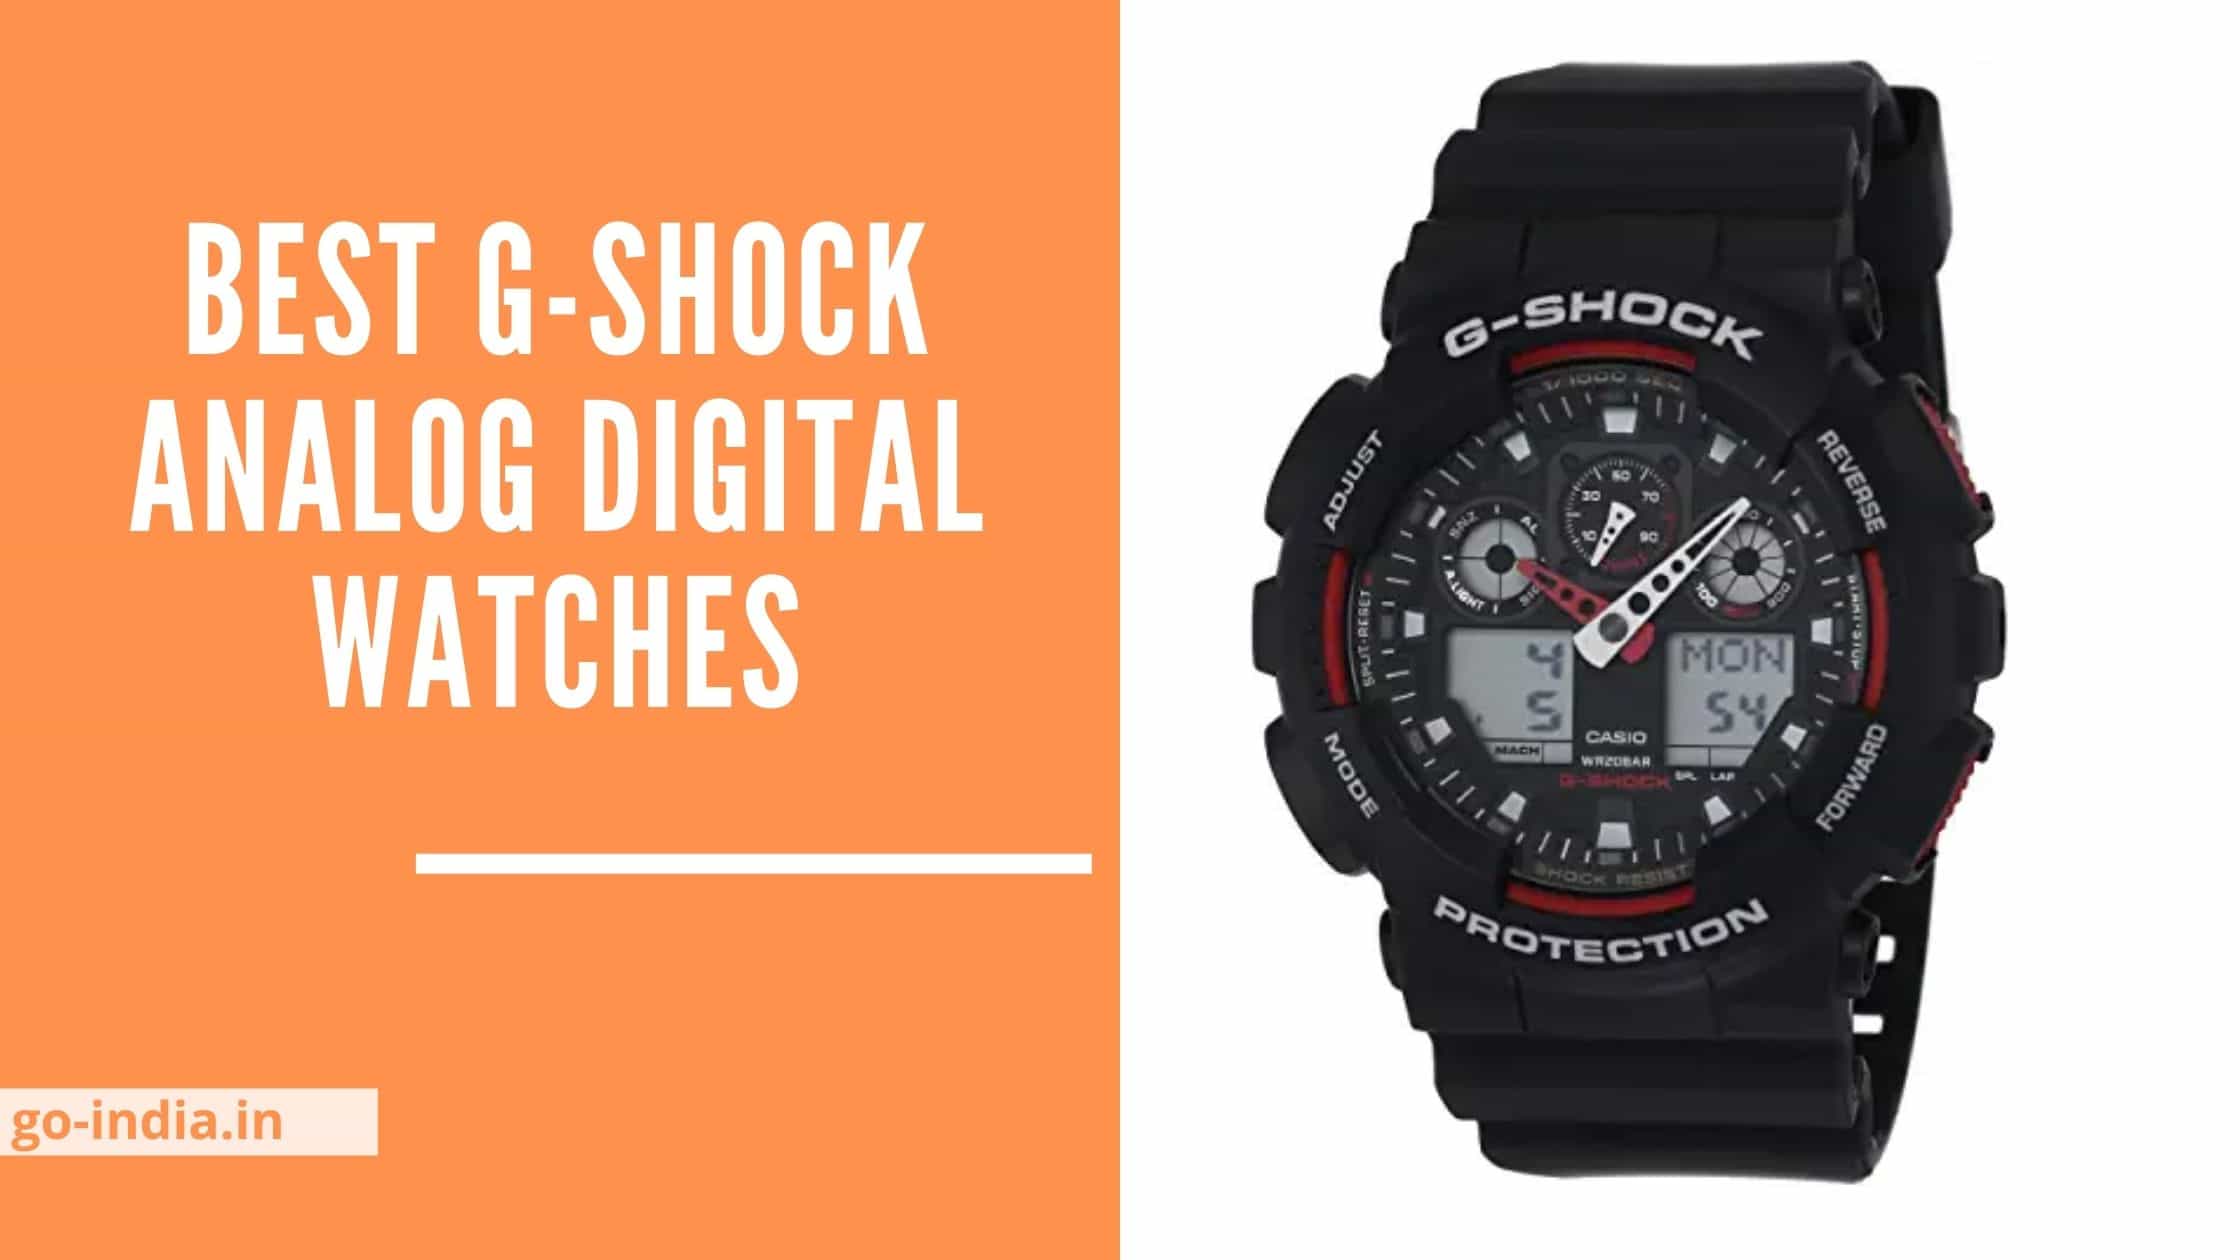 Top 10 Best G-Shock Analog Digital Watches in India 2022